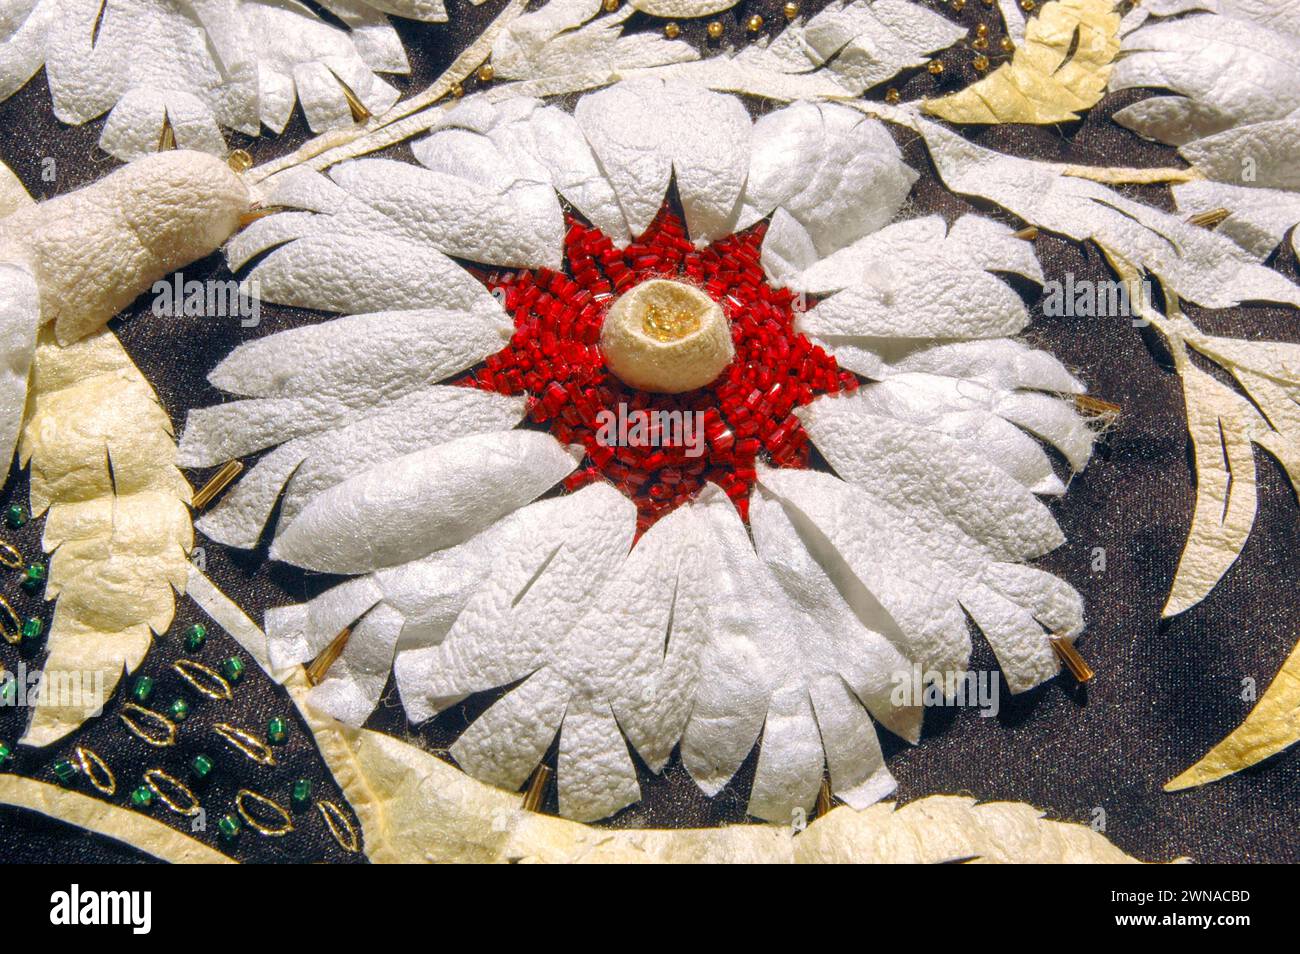 Cutting filigree ornaments from the cocoons of silkworms is a tradition in Cyprus. Stock Photo